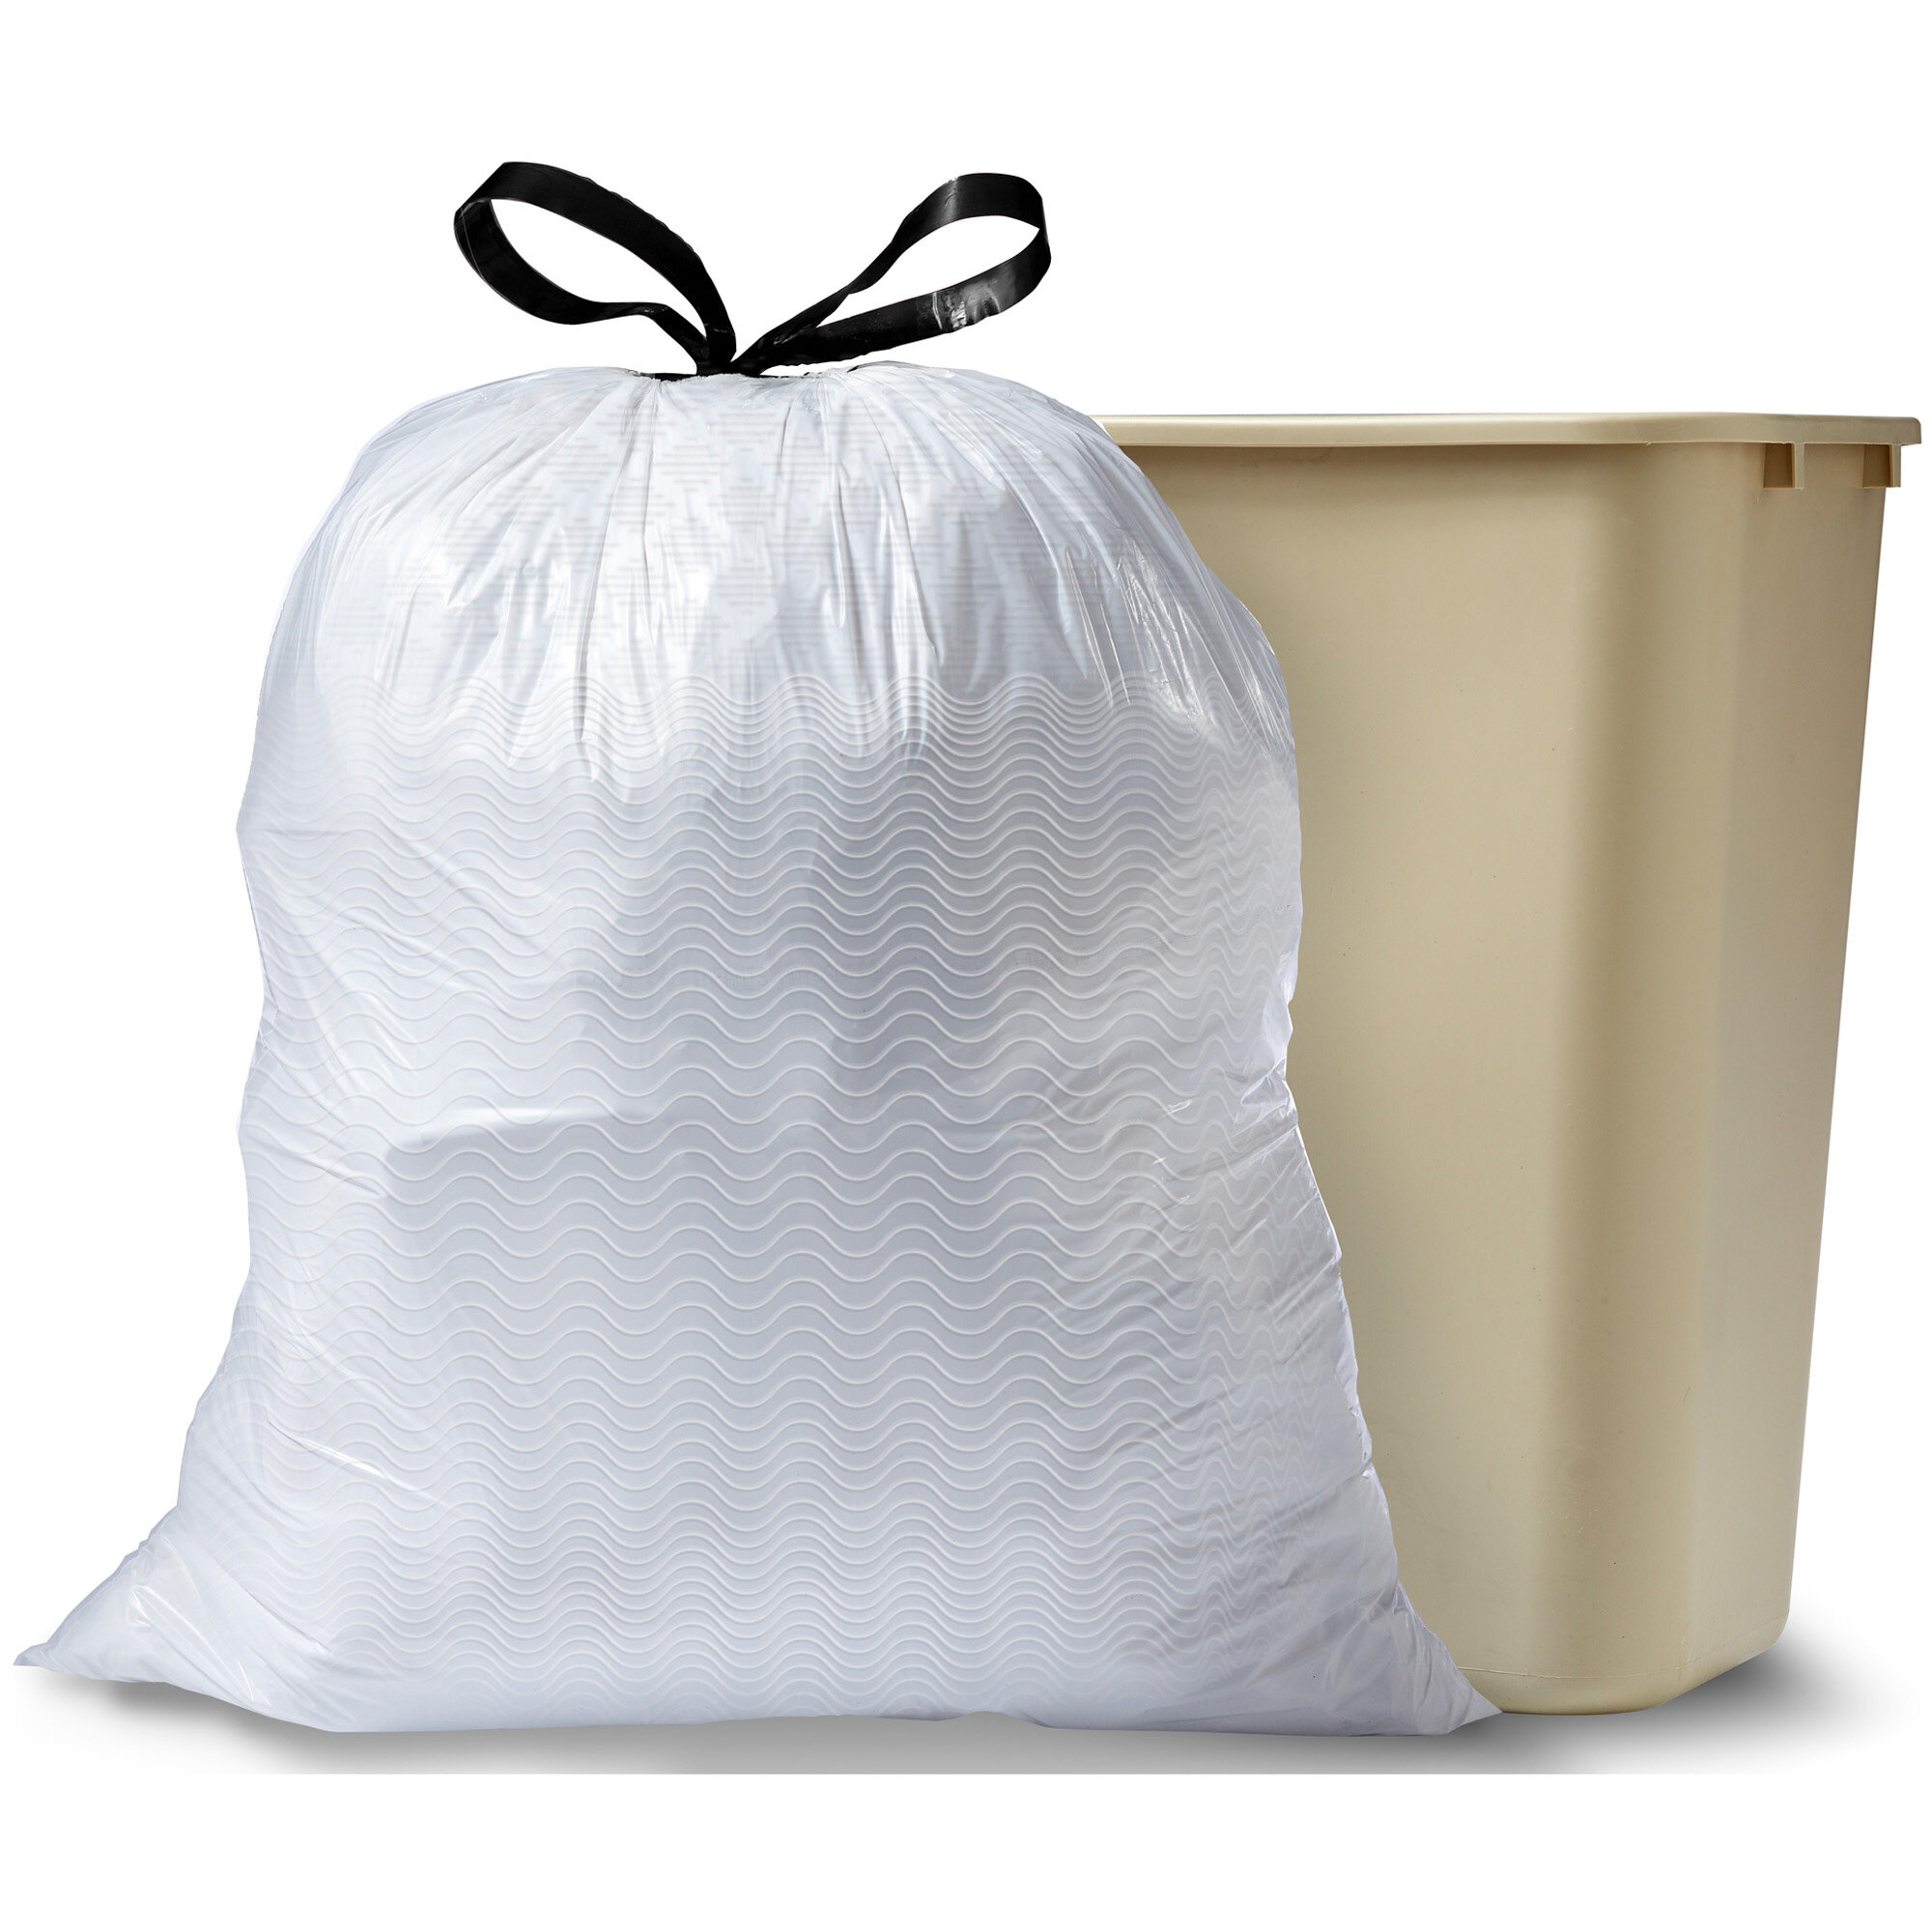 Small Trash Bags 3 Gallon Garbage Bags for Batroom,120 Count,White